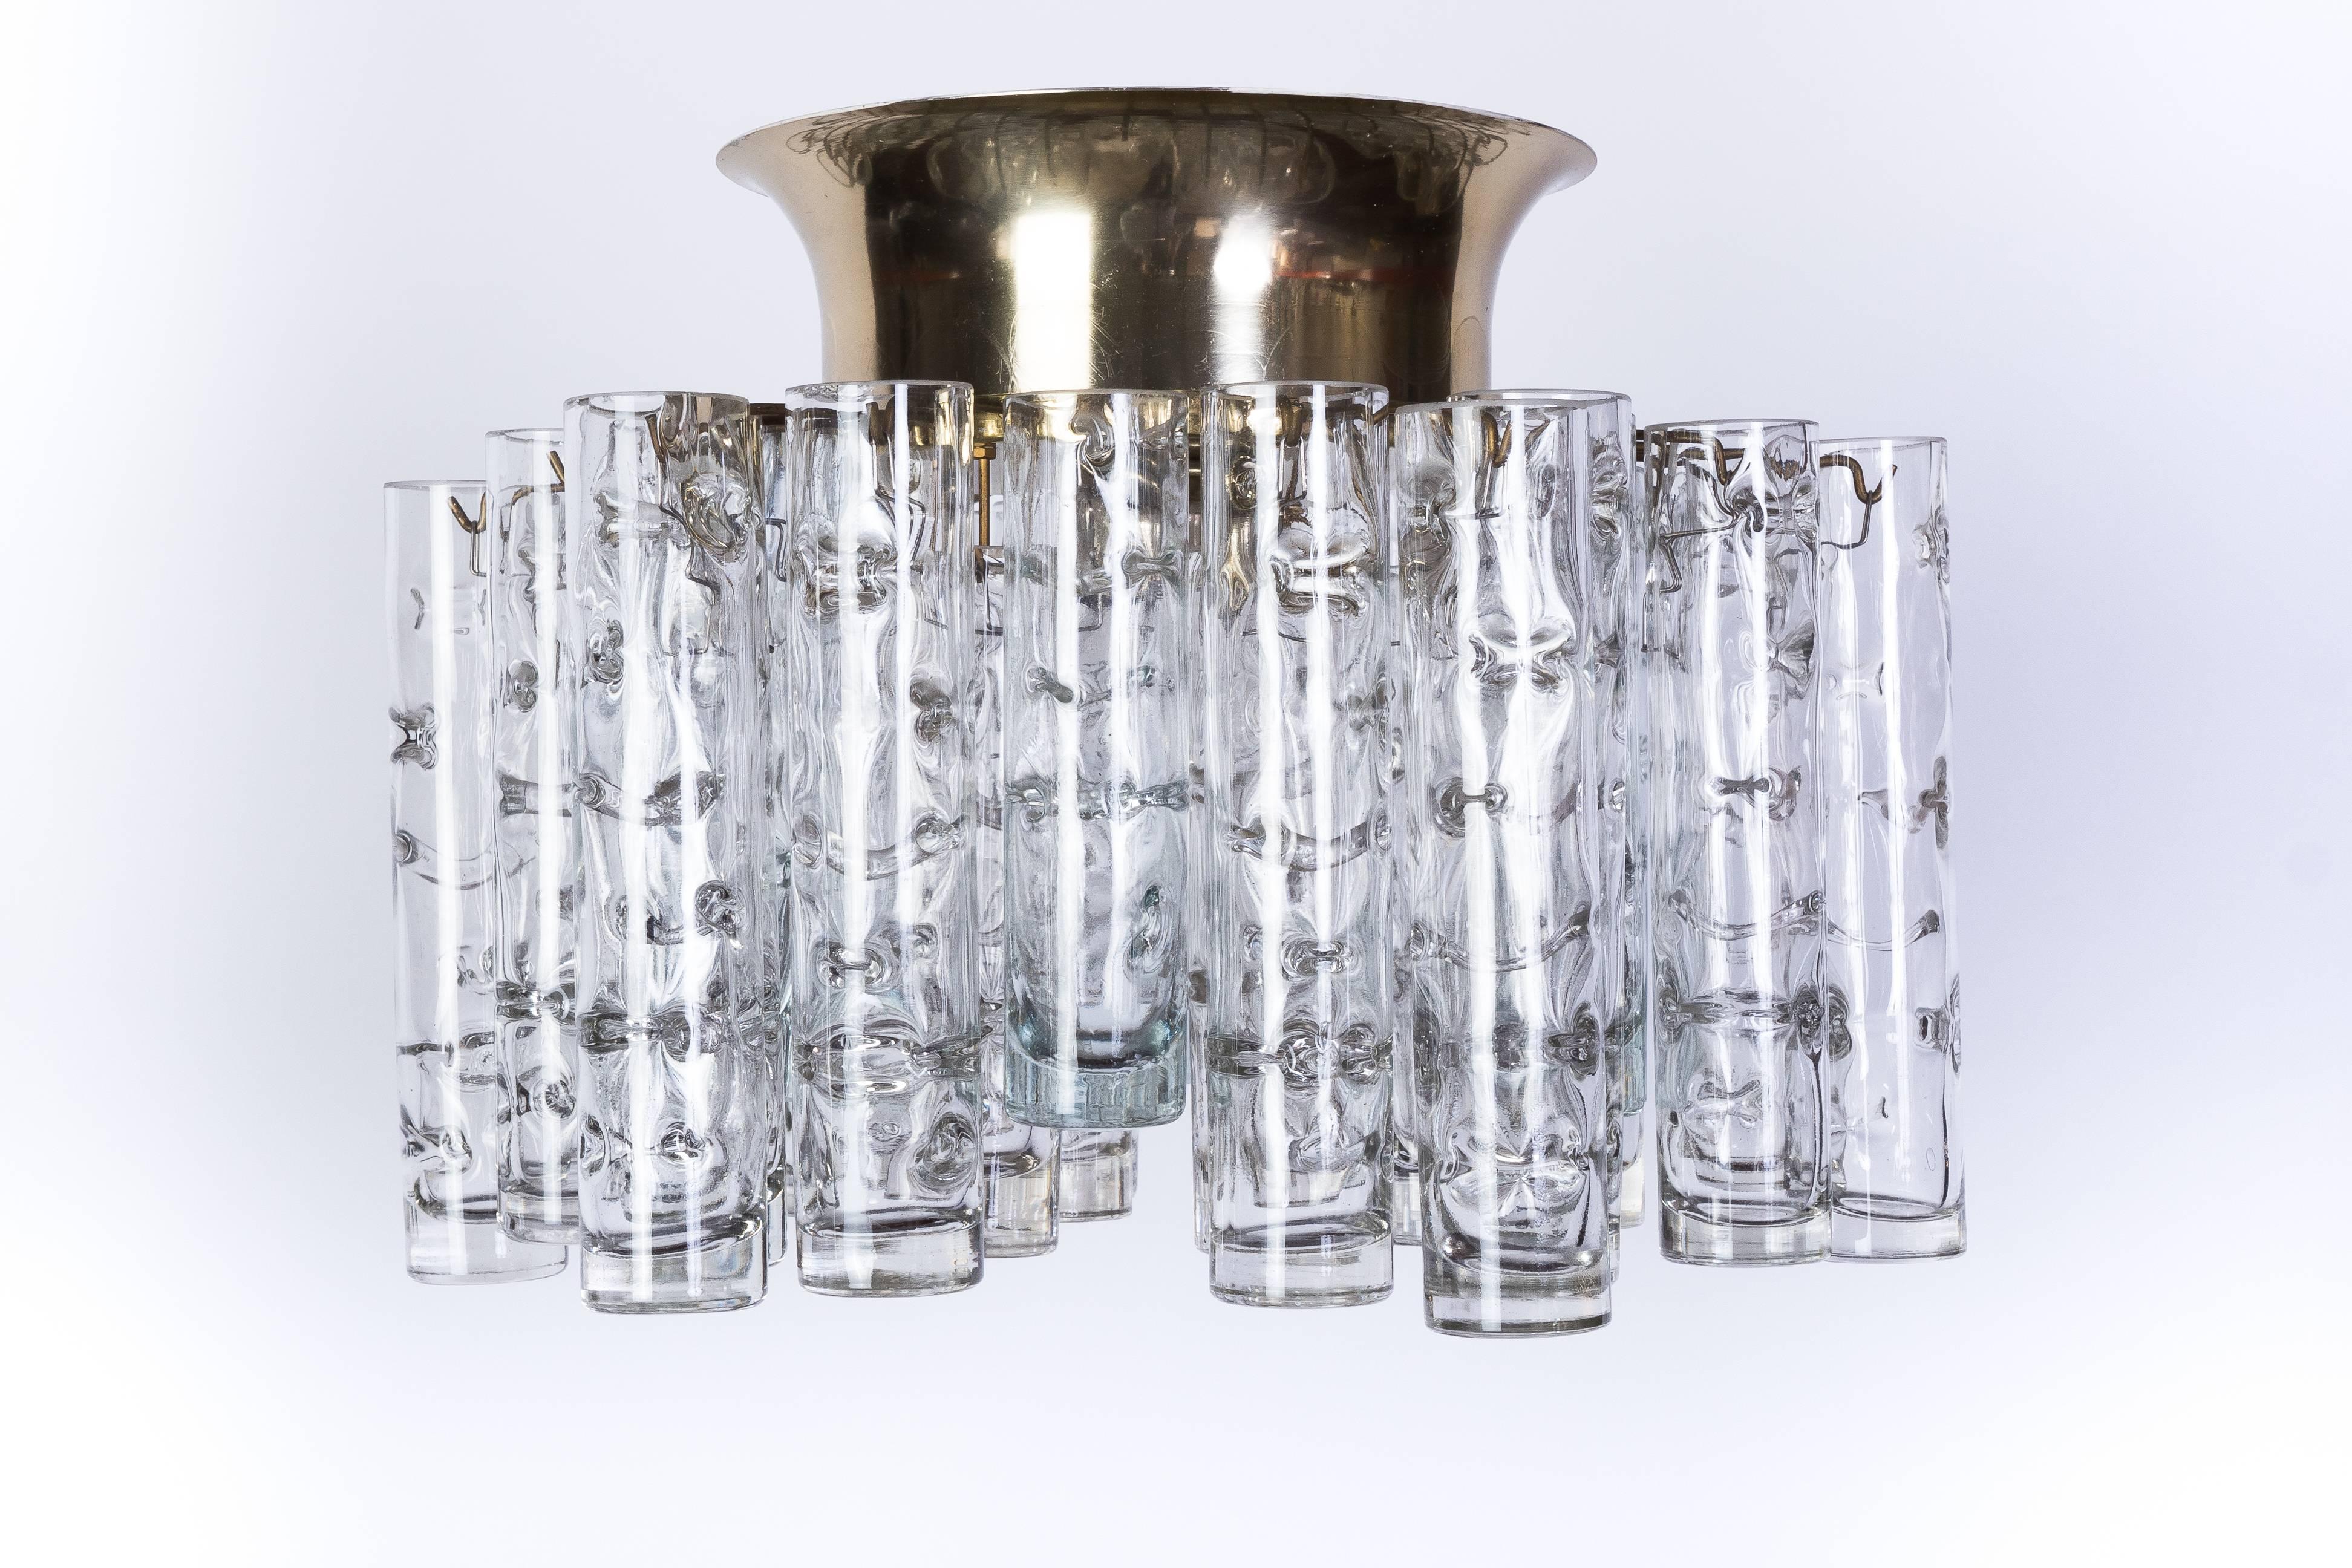 This exceptional German 1950s flush mount was designed by Doria. It features 30 handblown textured glass tubes cascading from a circular brass frame. It is in excellent condition and has been newly rewired.